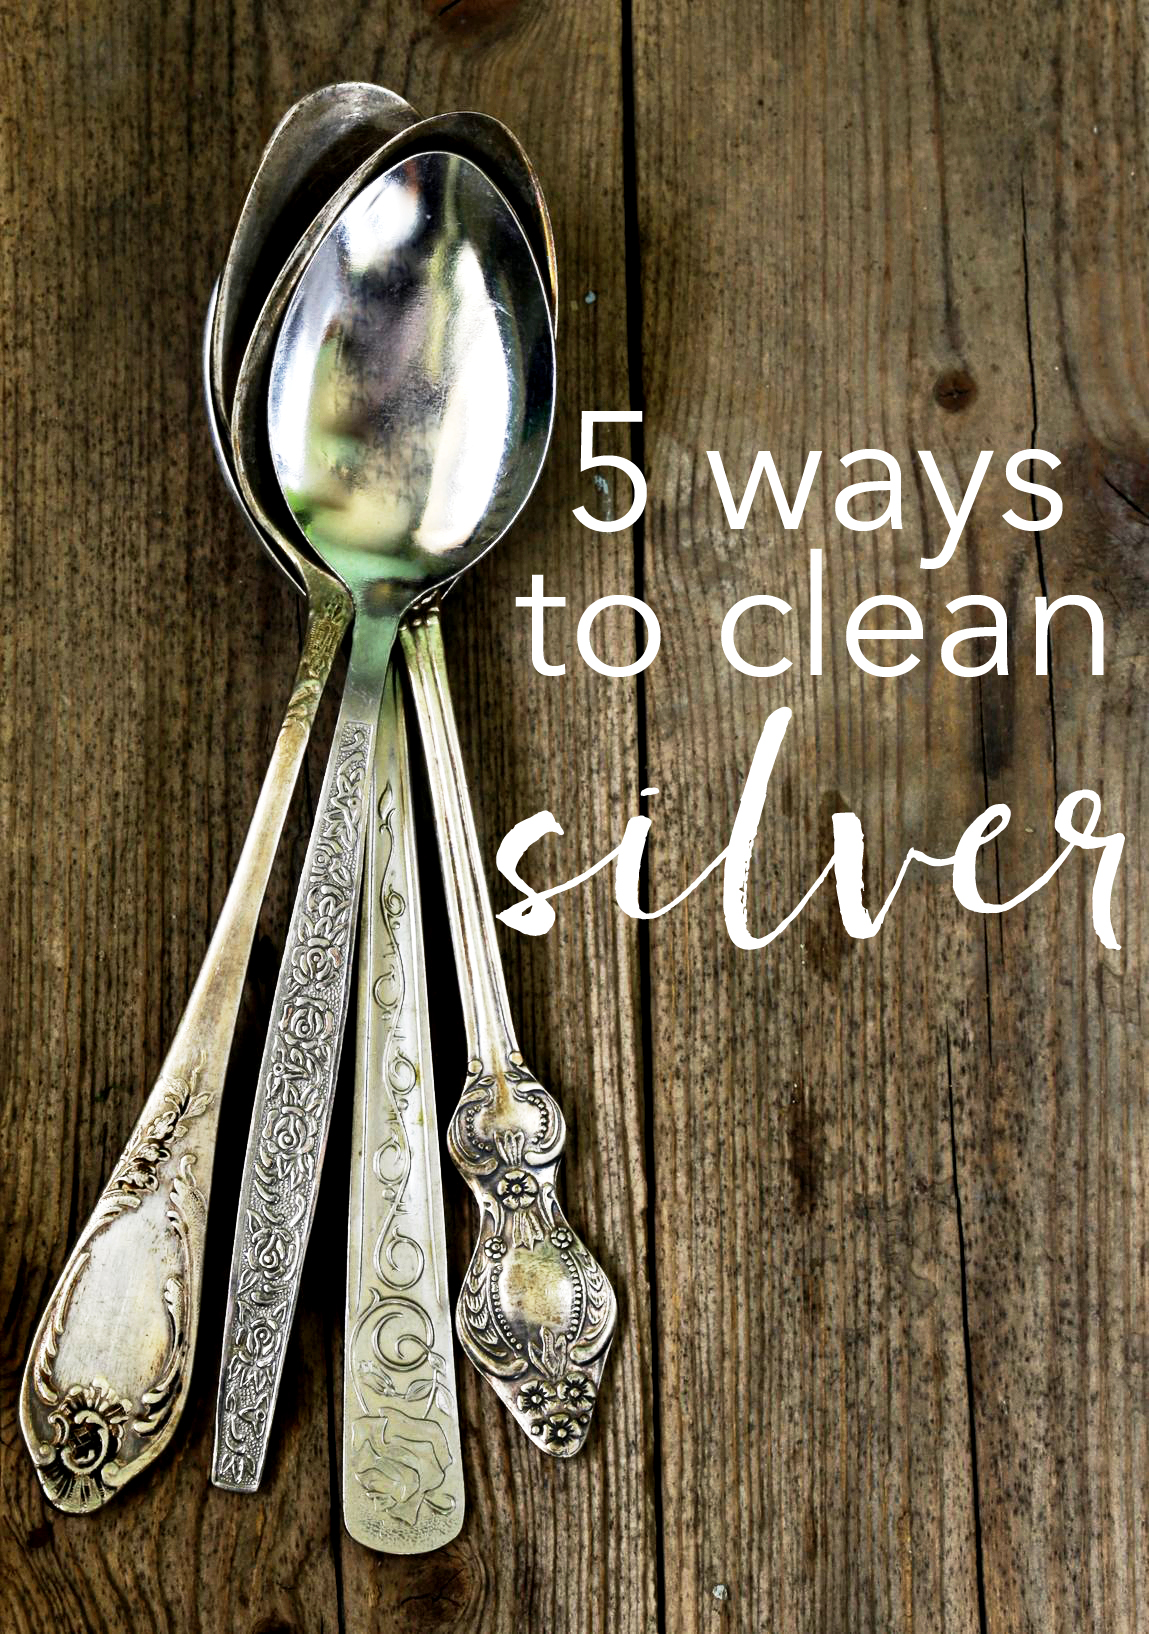 https://www.theshabbycreekcottage.com/wp-content/uploads/2016/09/how-to-clean-silver.jpg